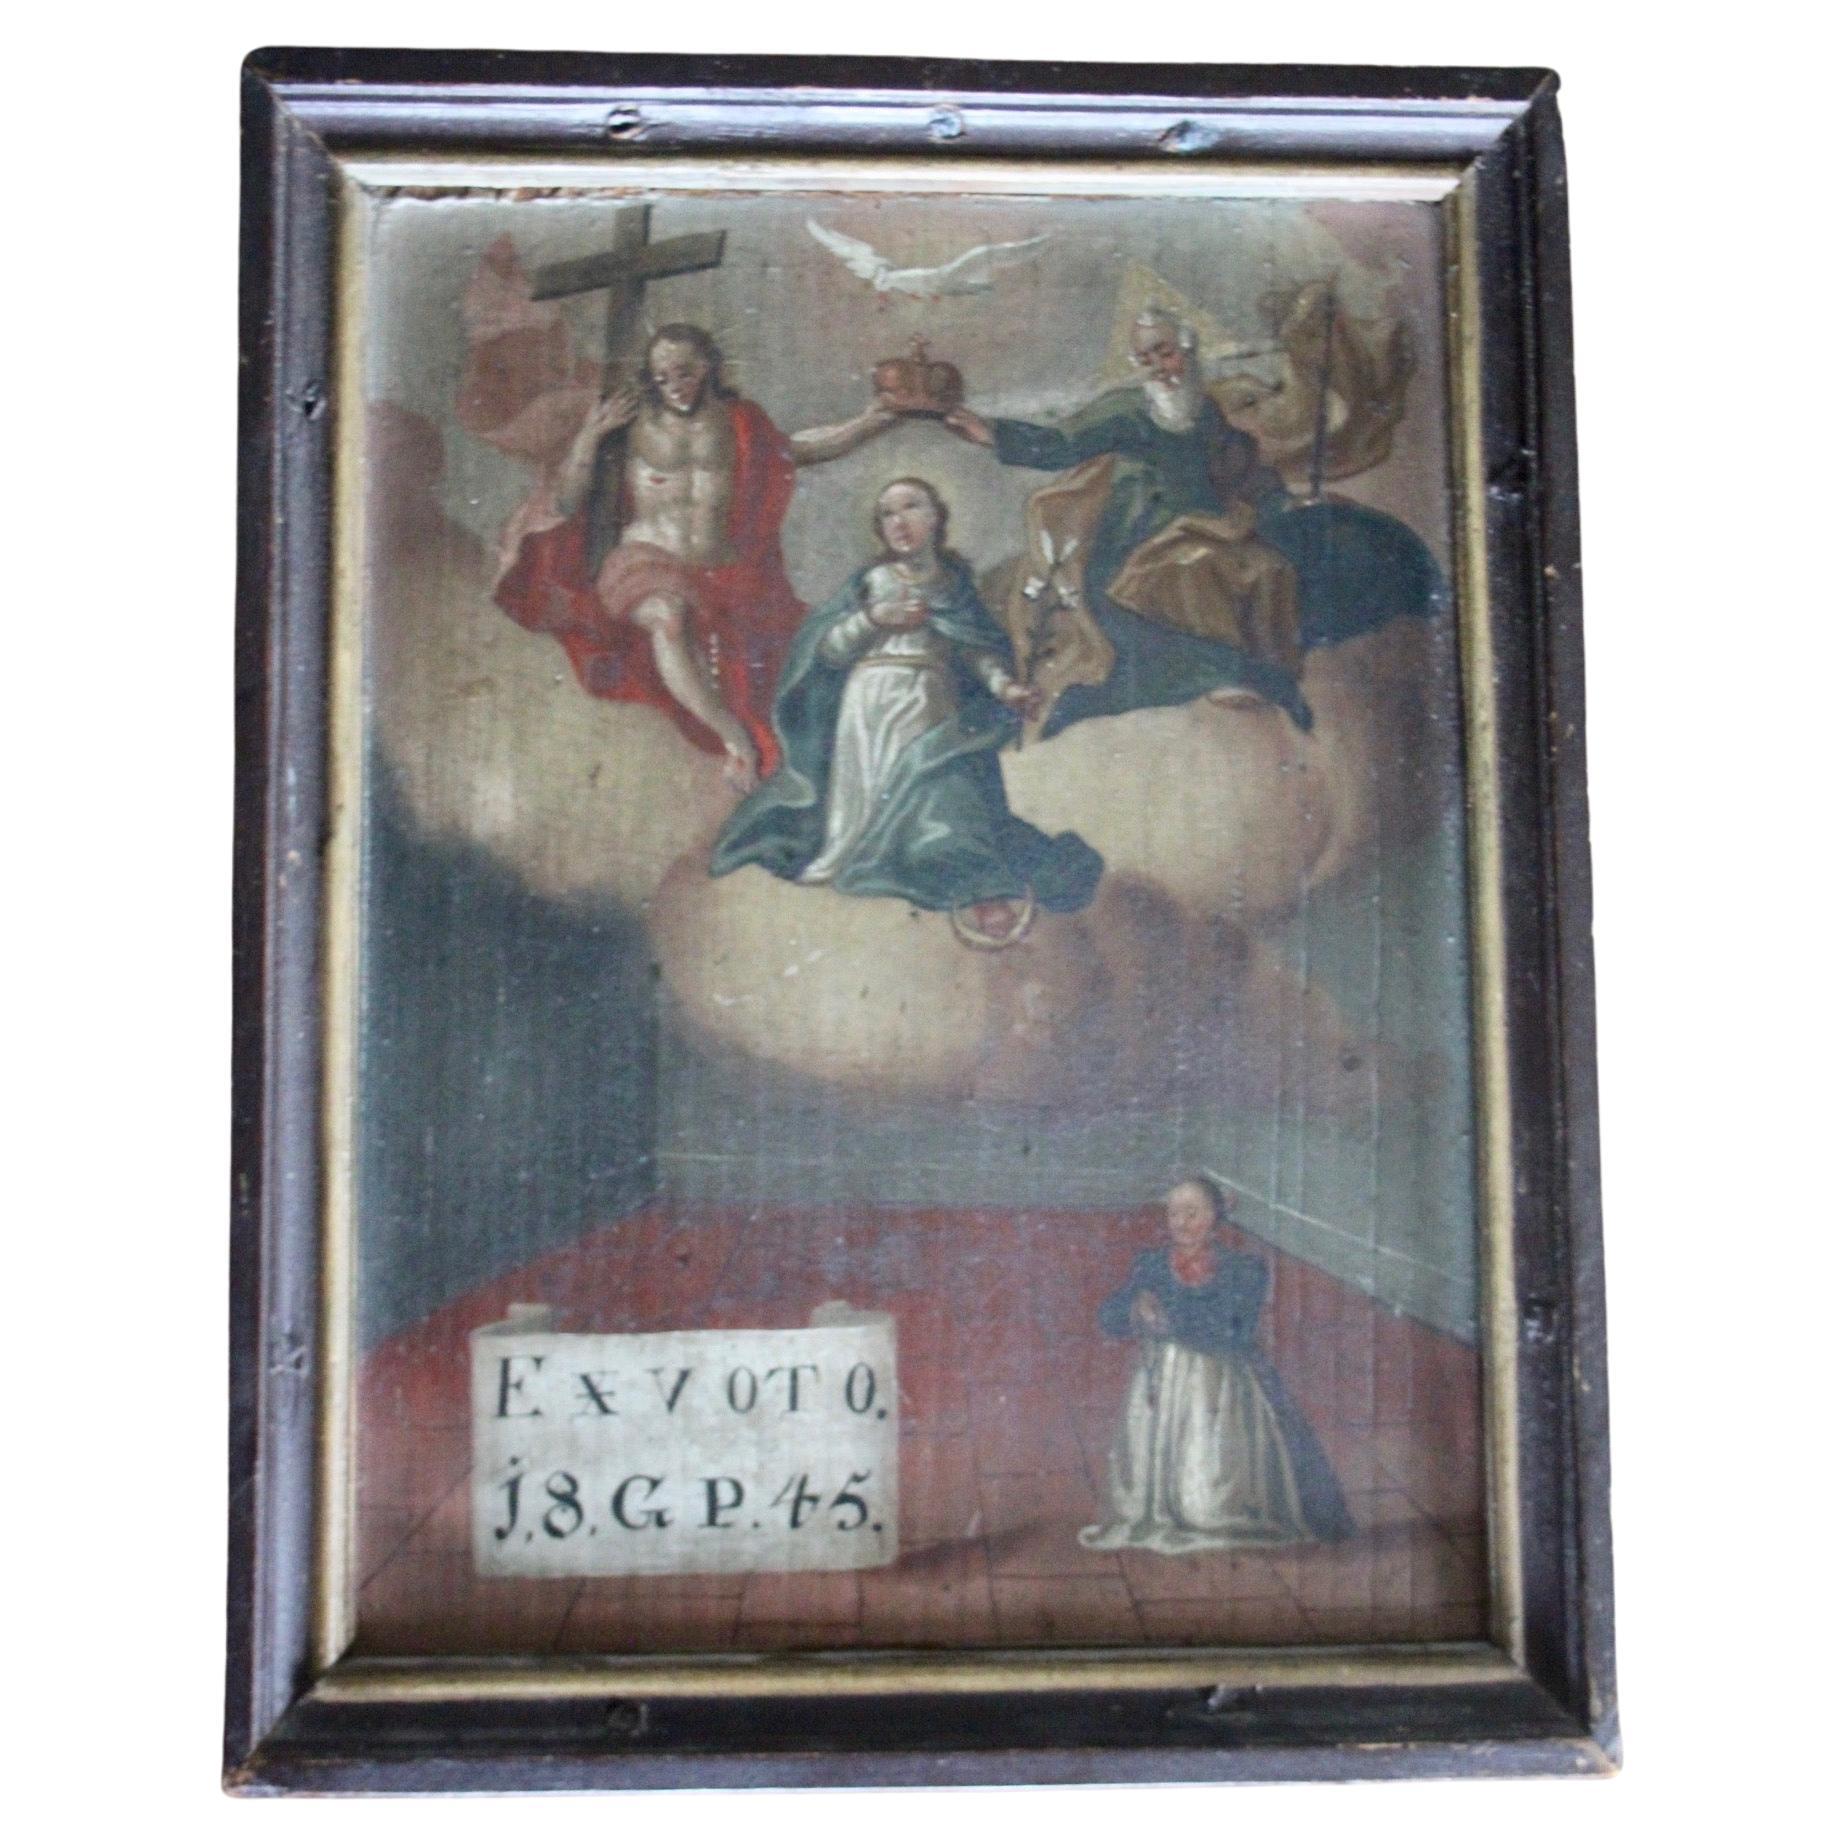 Ex voto painting dated 1845 For Sale